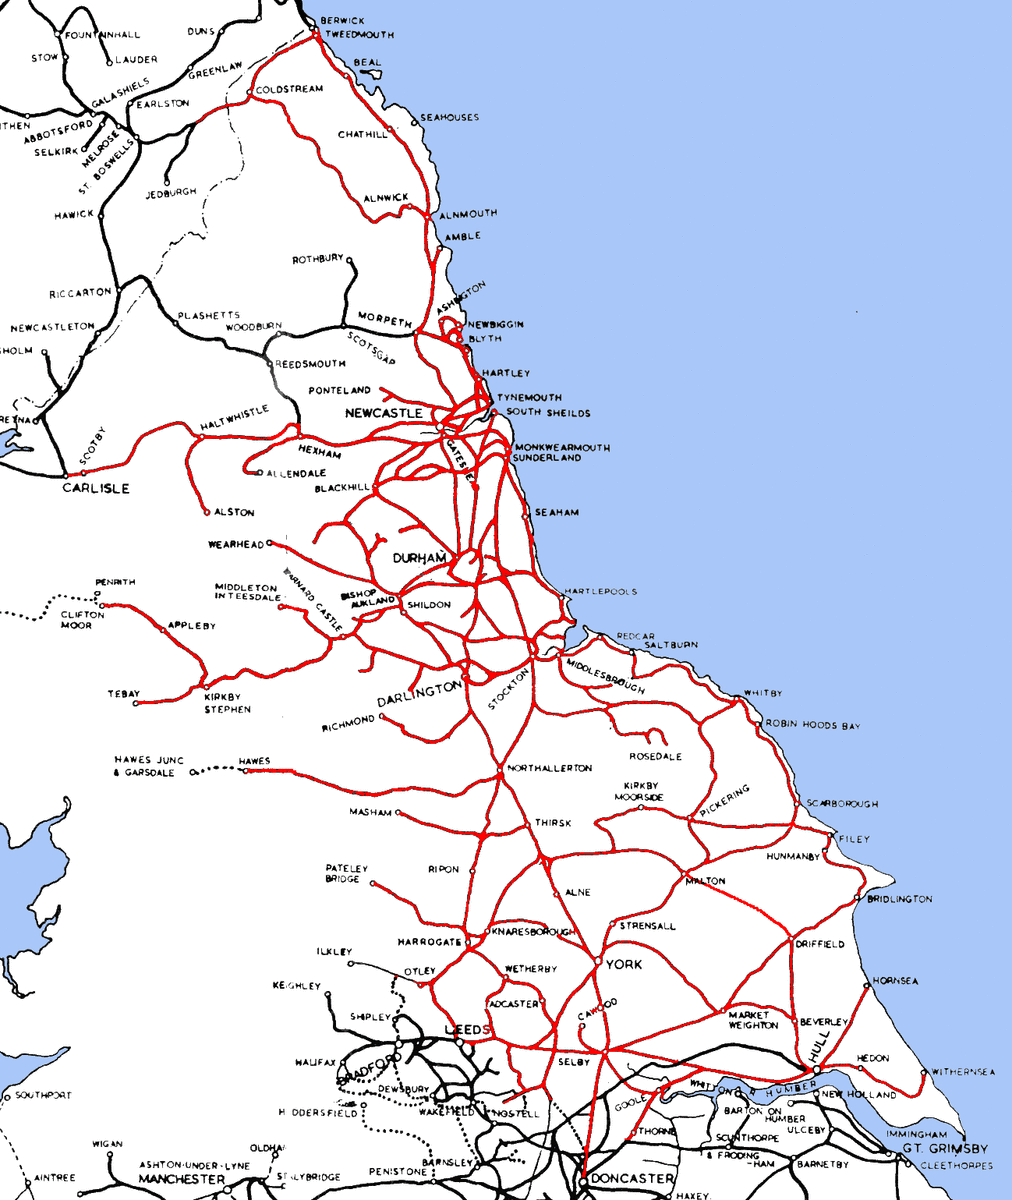 Route map of the North East with connections to other companies' lines - the NER was one of the richest, with a large slice of industry and the East Coast Main Line as well as many major cities (Hull, Leeds, Newcastle, Bradford, Durham, York)